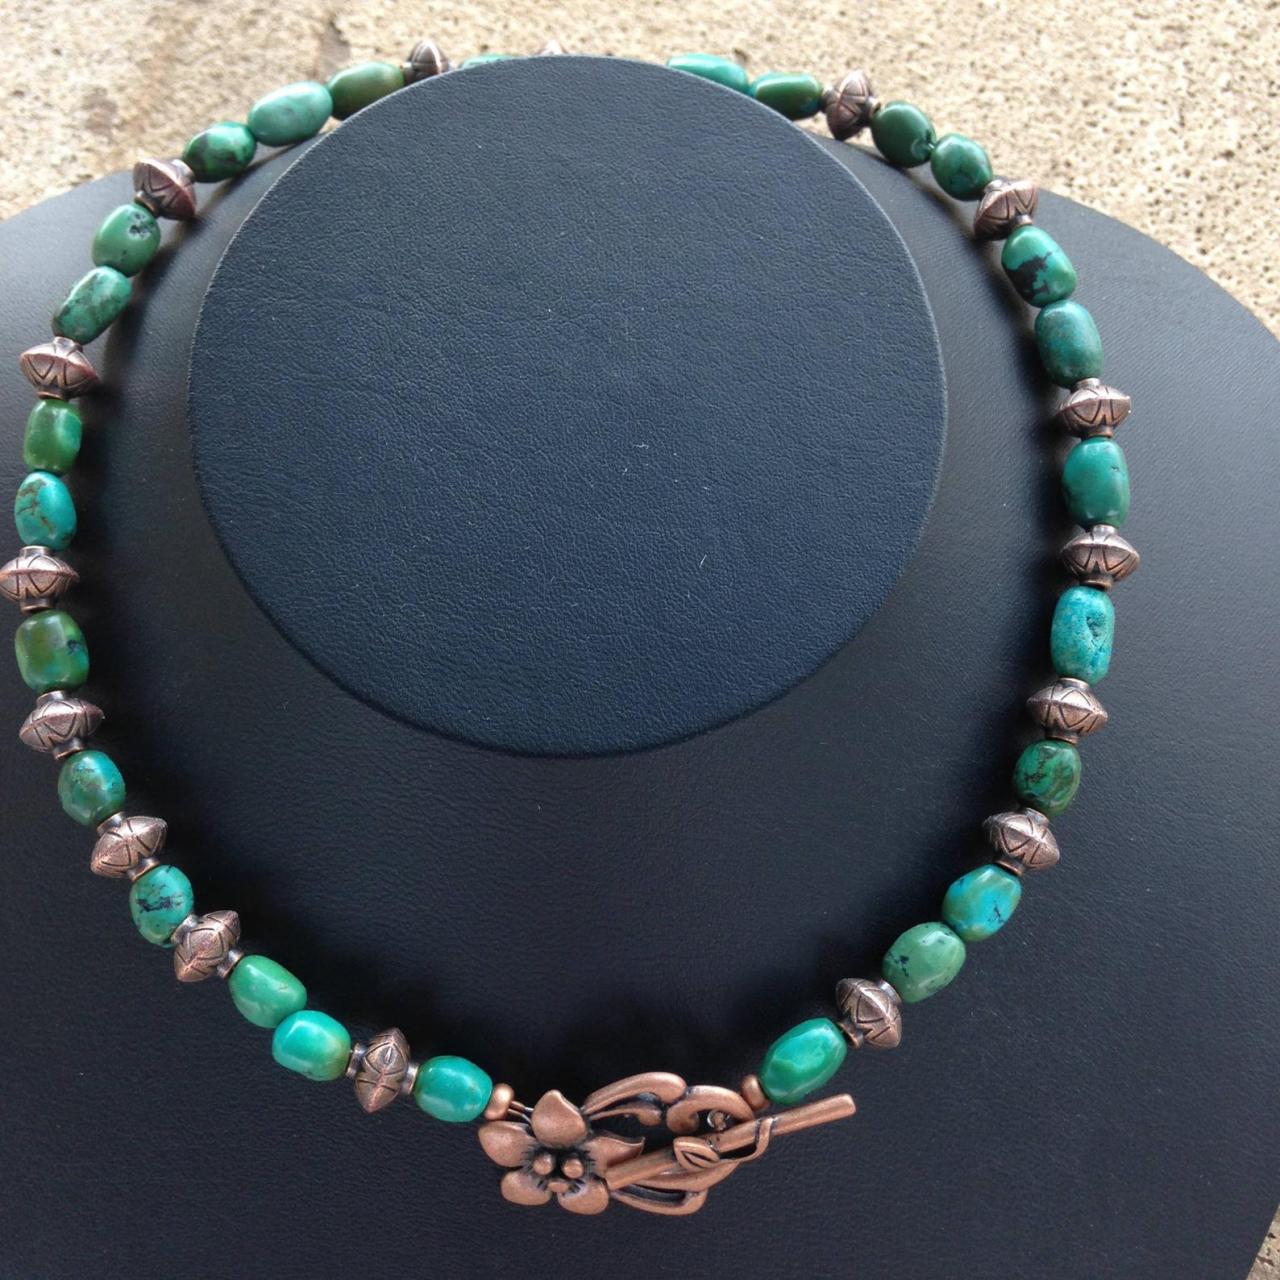 Turquoise And Copper Beaded Necklace/ Turquoise Beaded Necklace/ Copper Beaded Necklace/ Boho Jewelry/boho Style